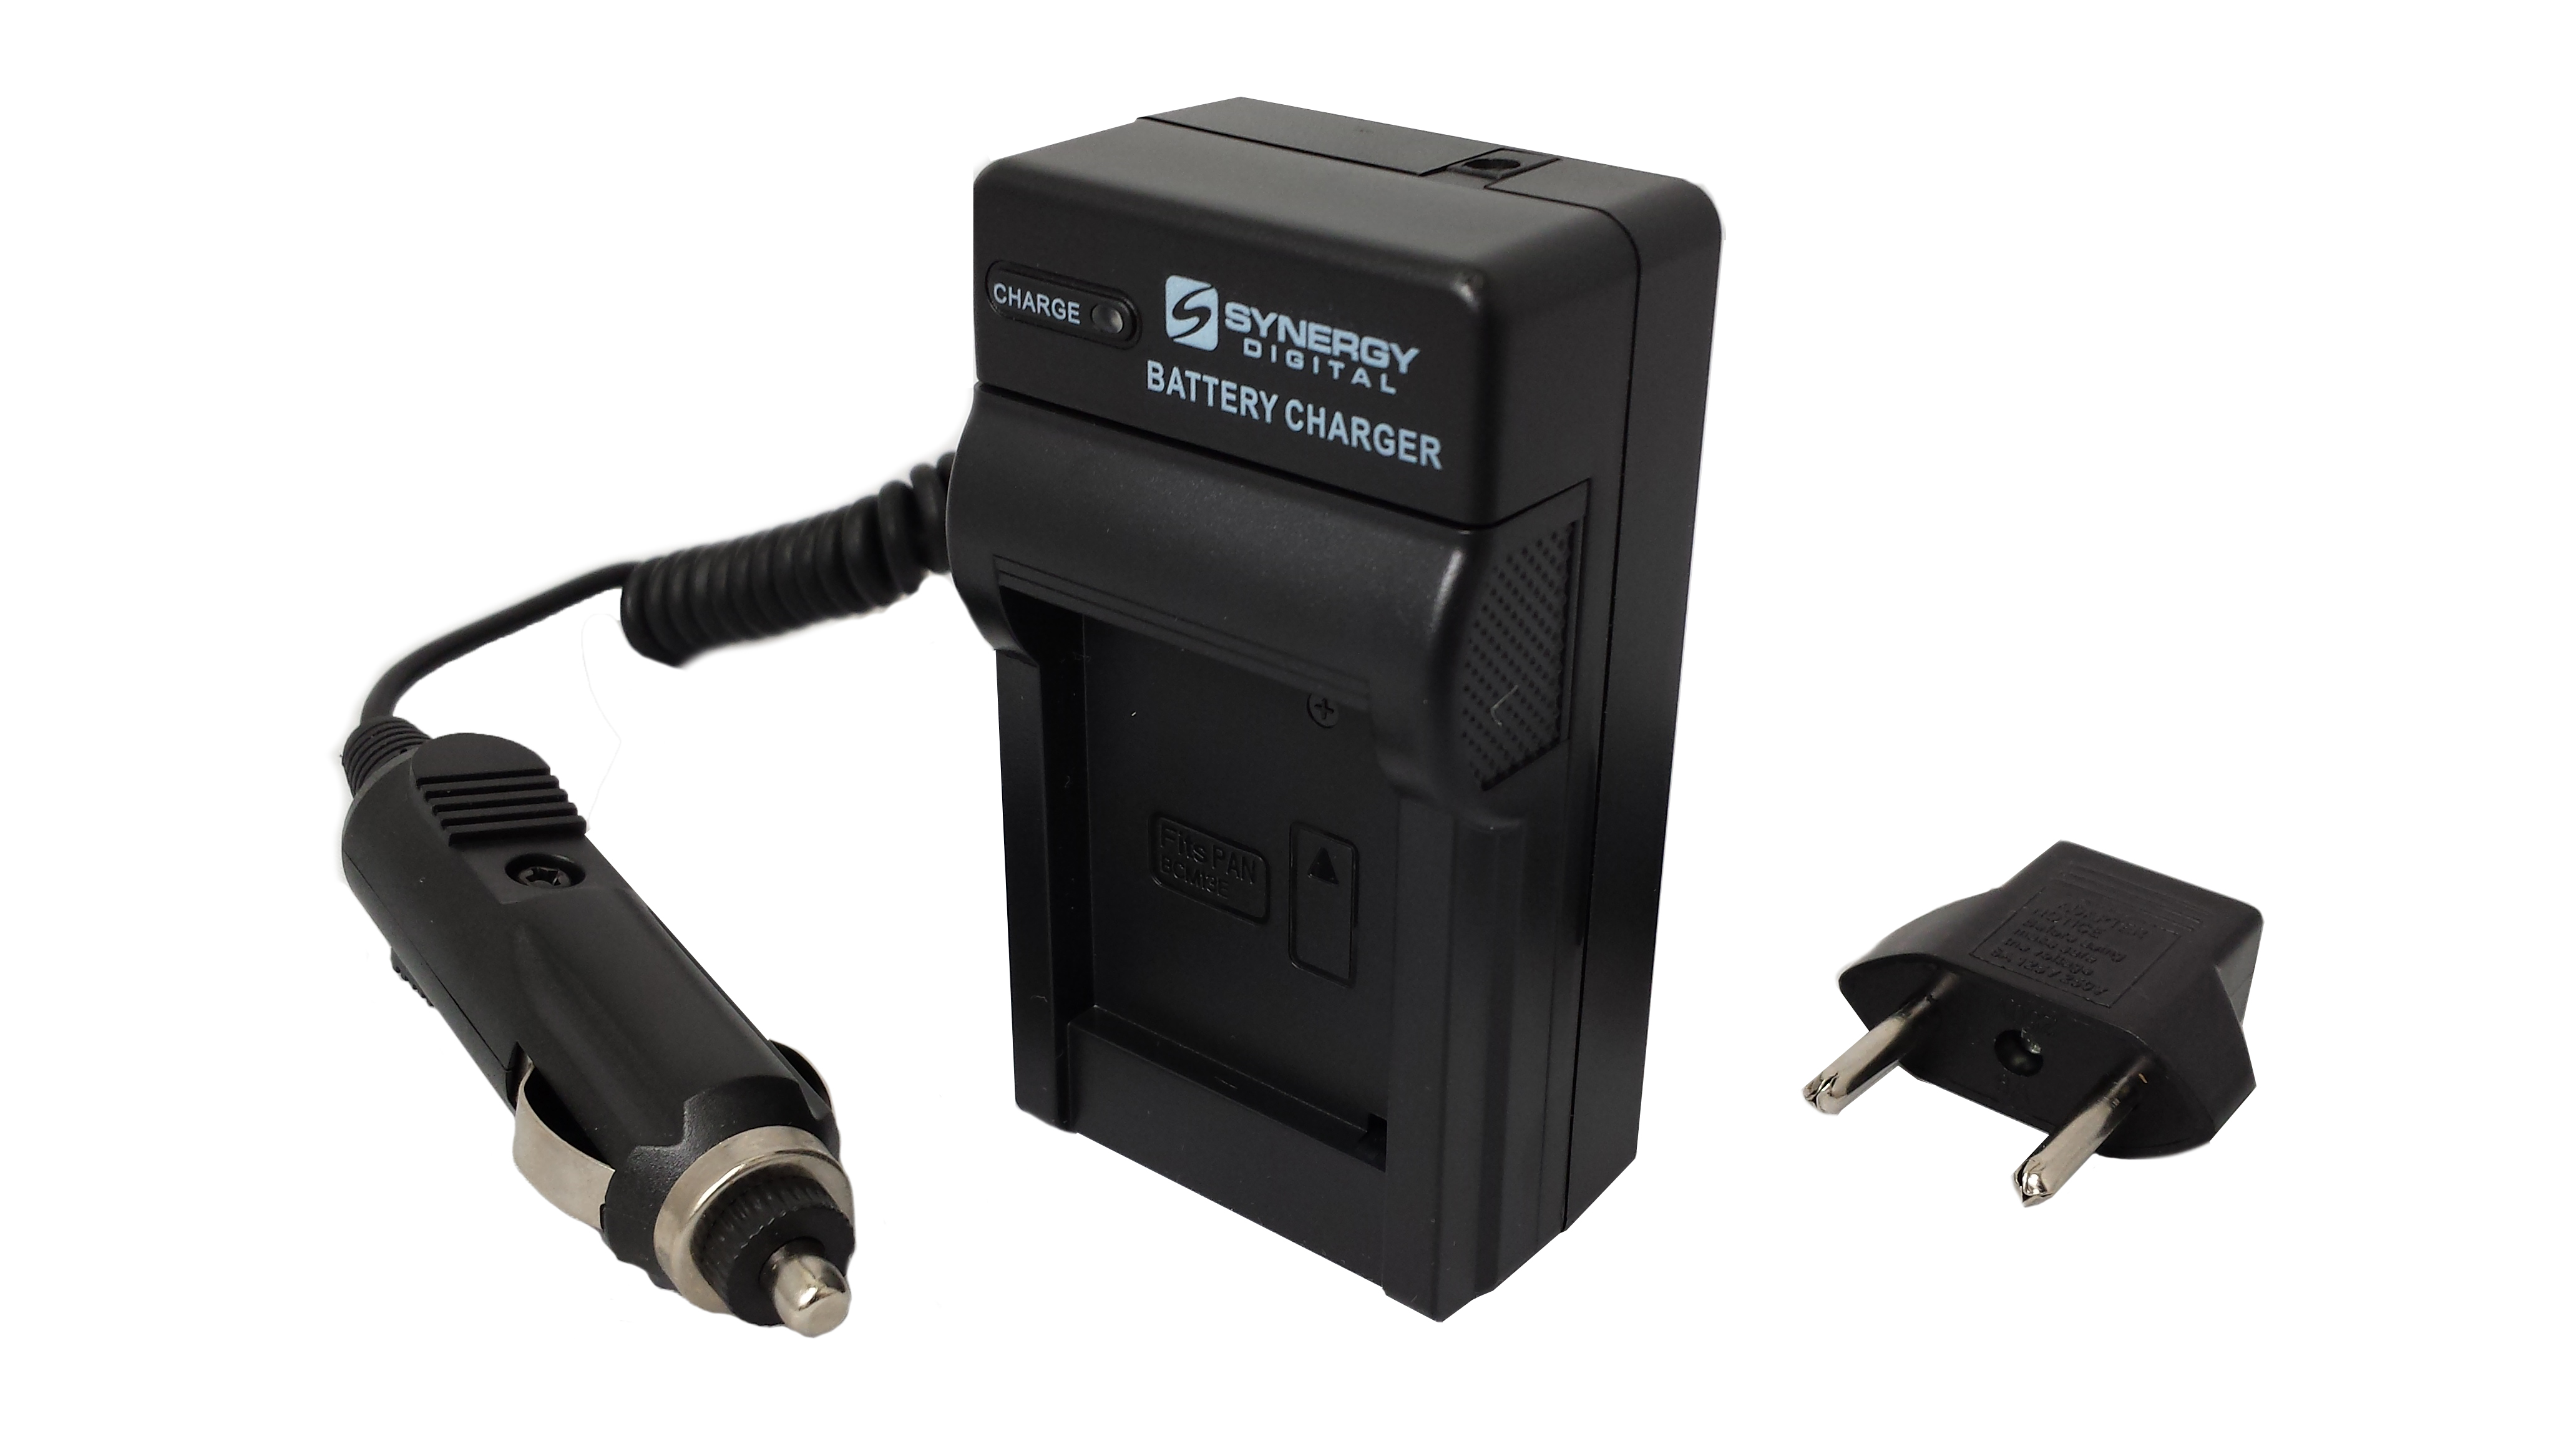 Mini Battery Charger Kit for the Panasonic DMW-BCN10 Battery - With fold-in wall plug, car & EU adapters